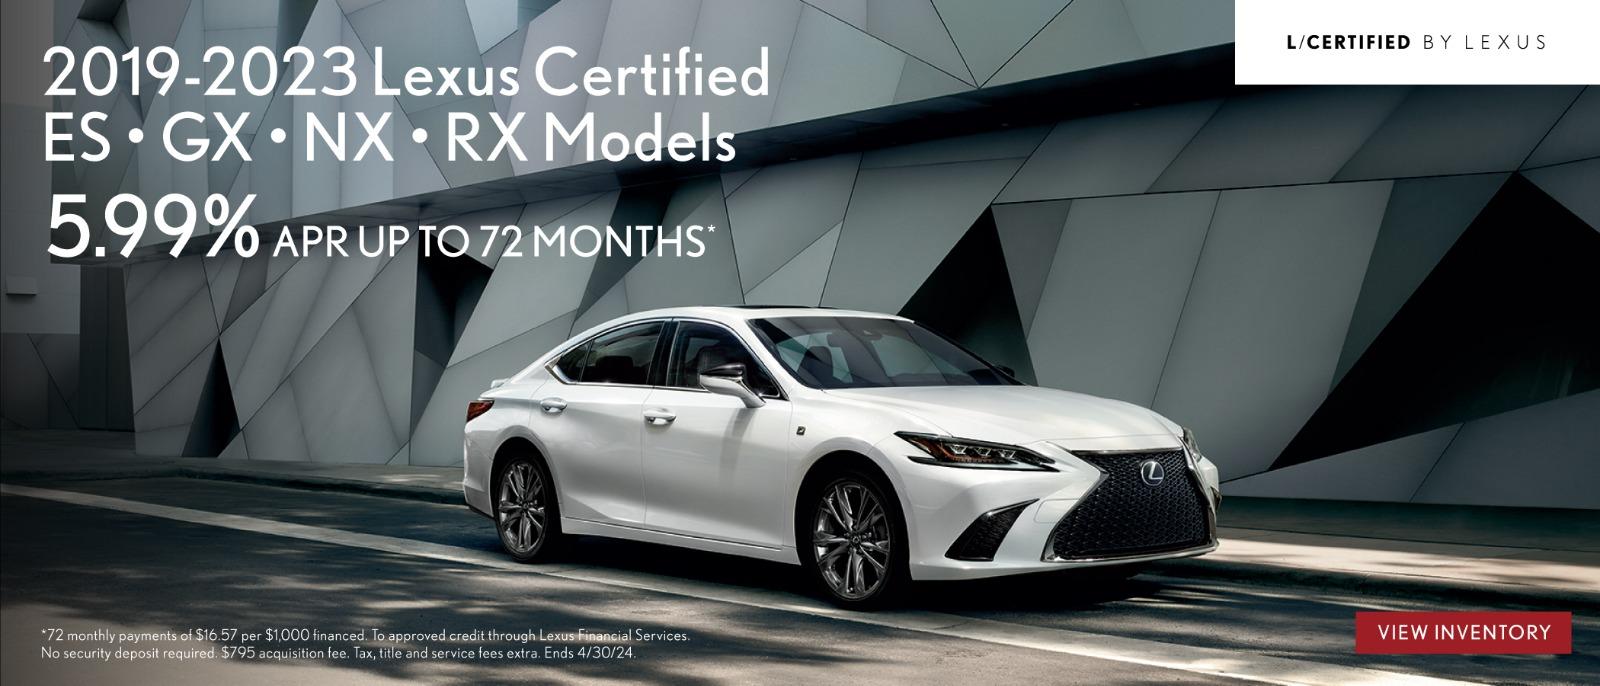 2019-2023 Lexus certified 599% APR up to 72 months*